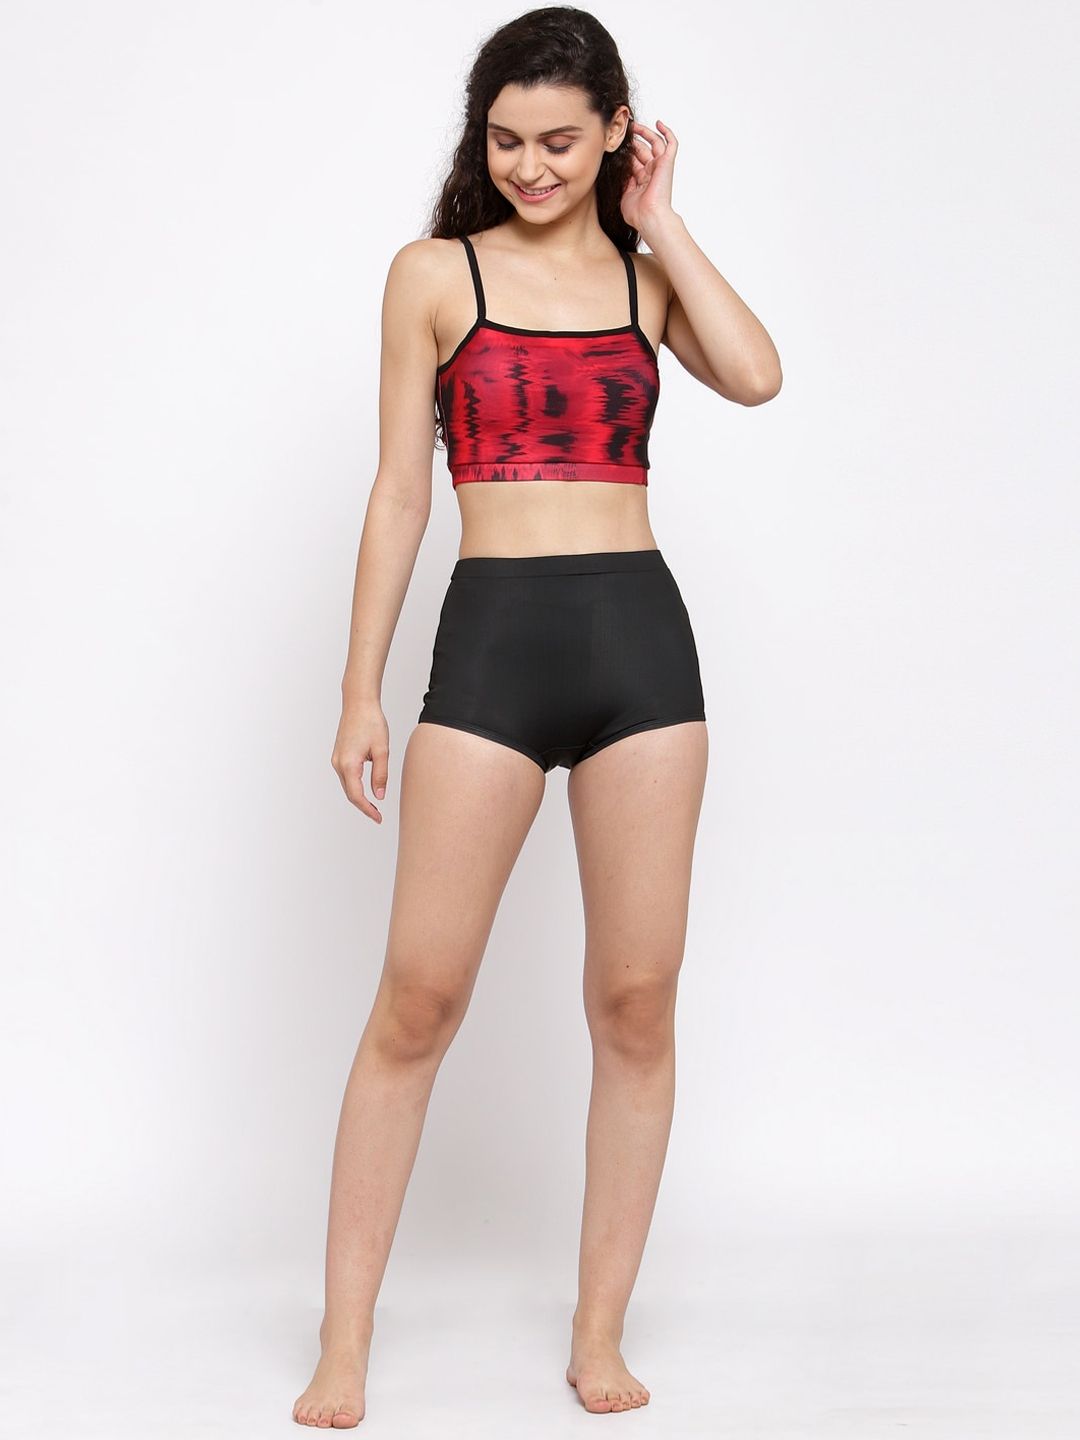 CUKOO Women Red & Black Abstract Printed Two Piece Swim Set Price in India